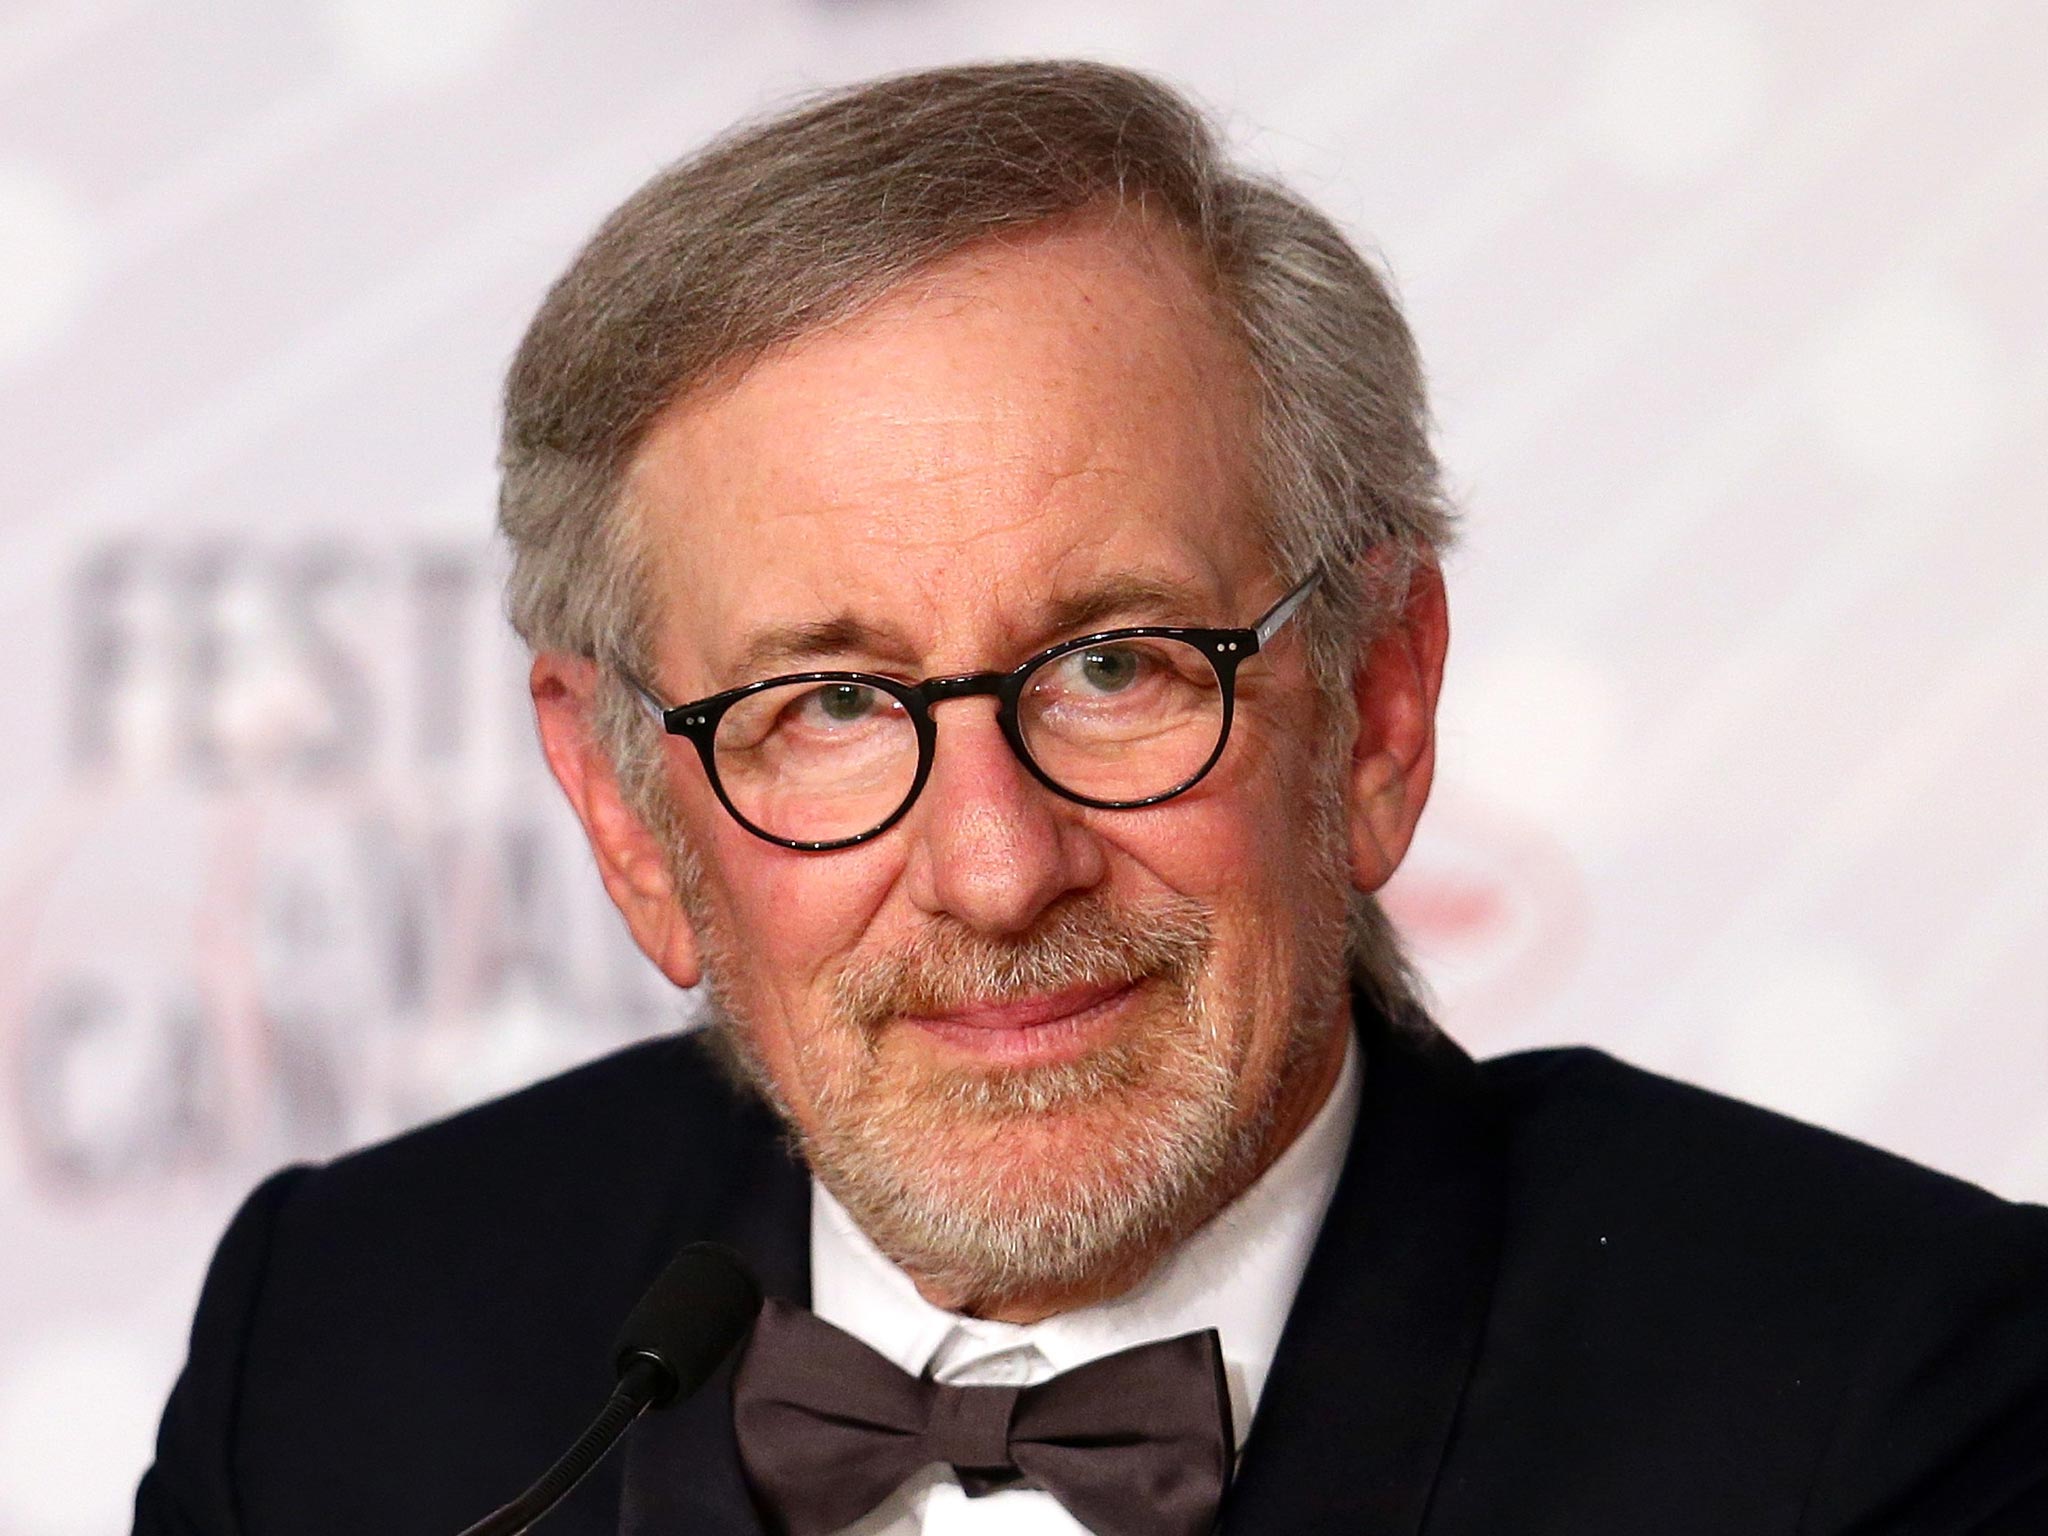 Director Steven Spielberg was third on Forbes' 2014 list of the Top 100 Most Powerful Celebrities